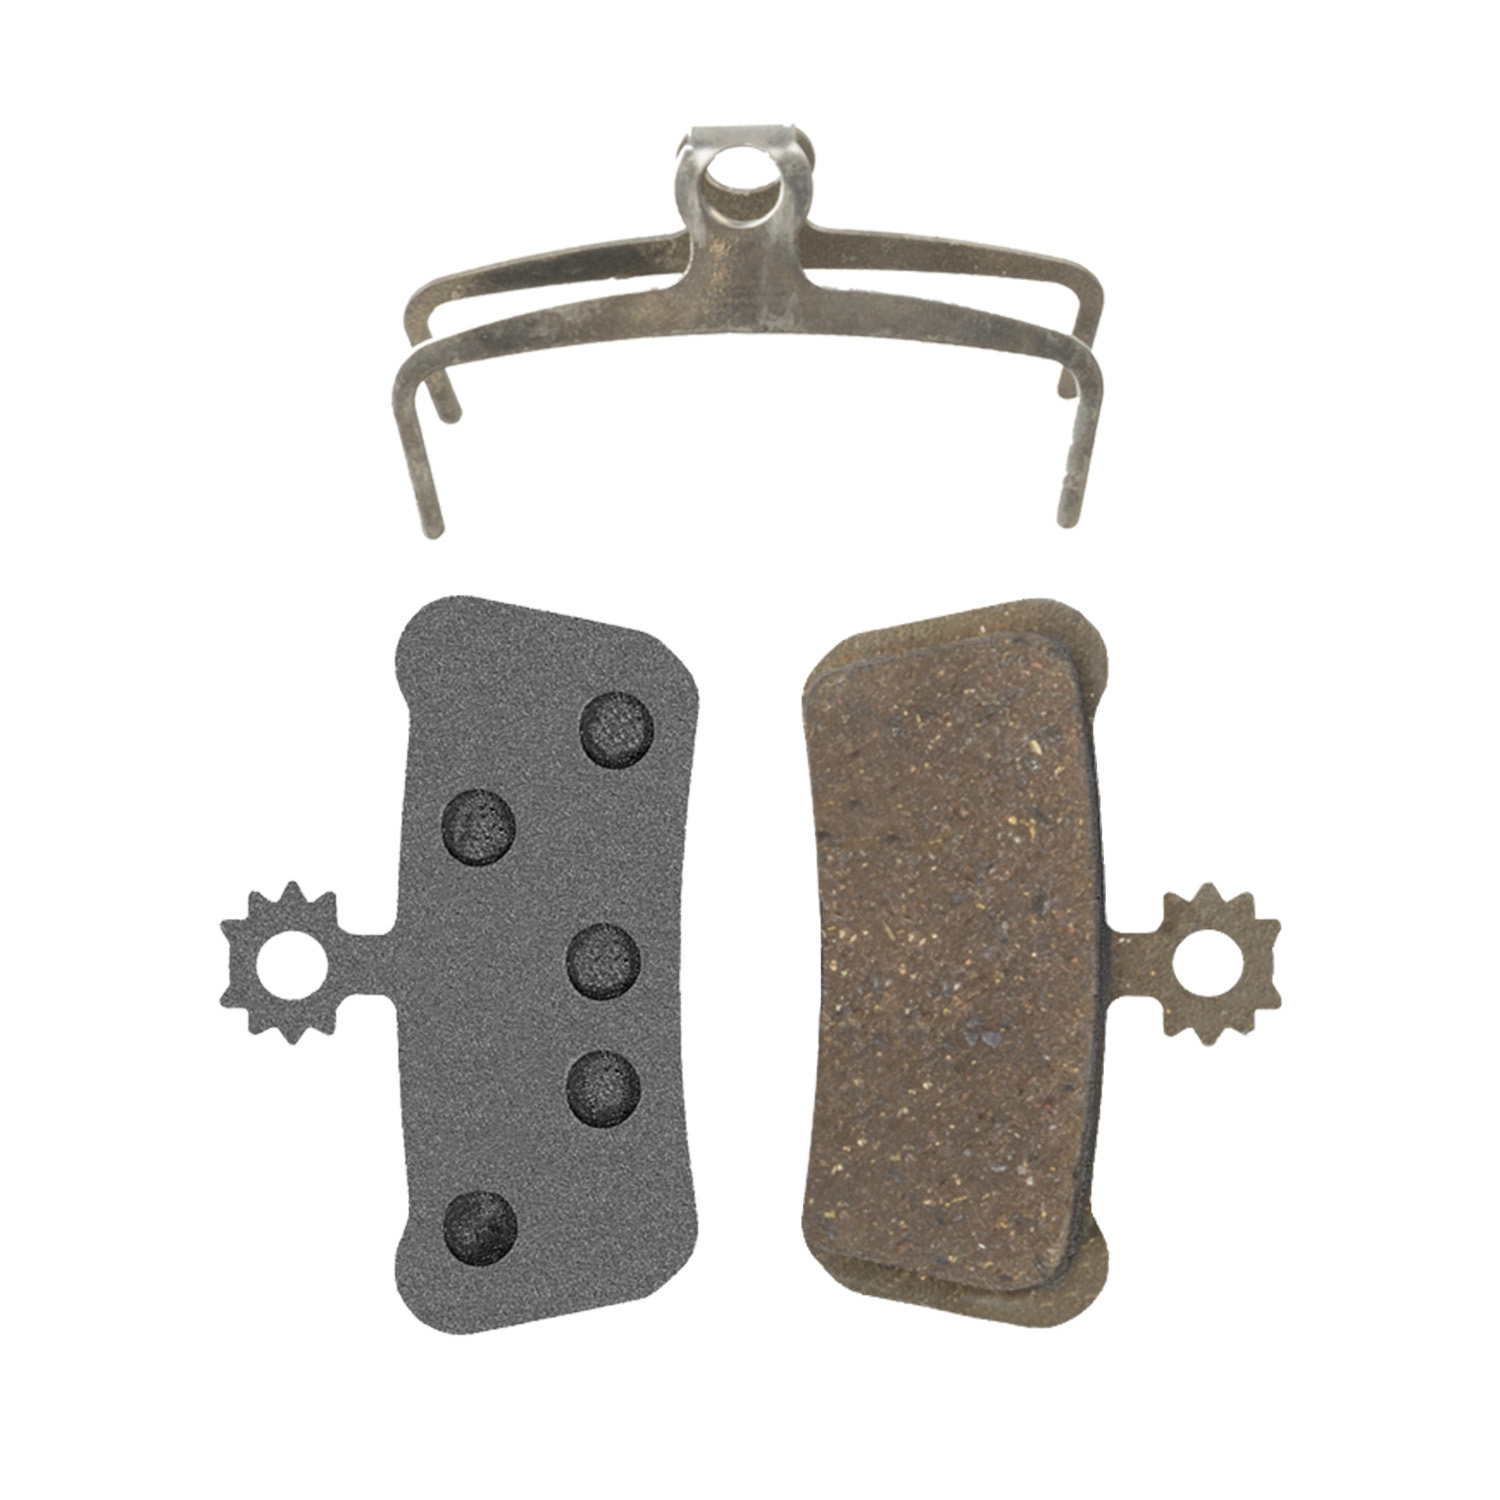 360741 – M-WAVE BPD Organic S3 brake pads for disc brake – AVAILABLE IN SELECTED BIKE SHOPS